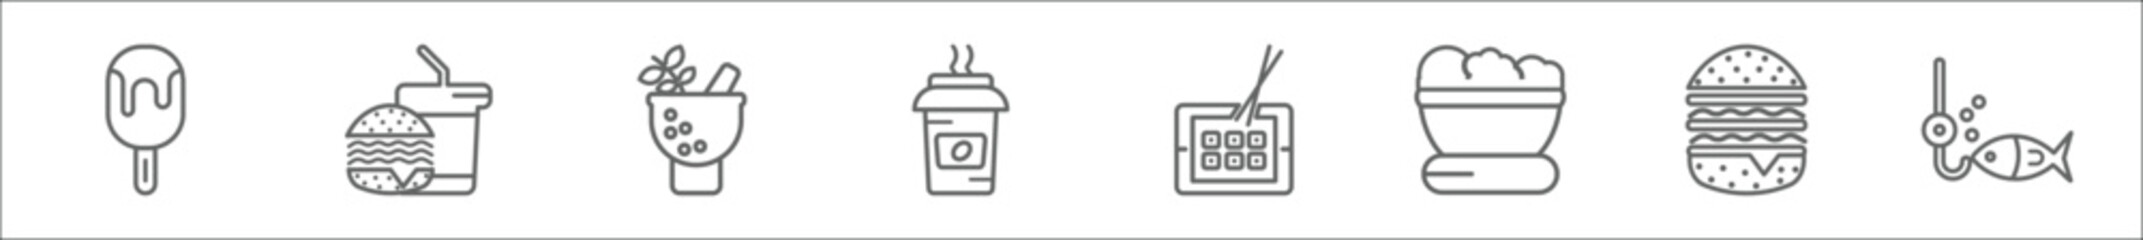 outline set of food line icons. linear vector icons such as ice lolly, hamburguer & drink, herb, coffe cup, sushi dish, fruit salad, give a burger, fishing line